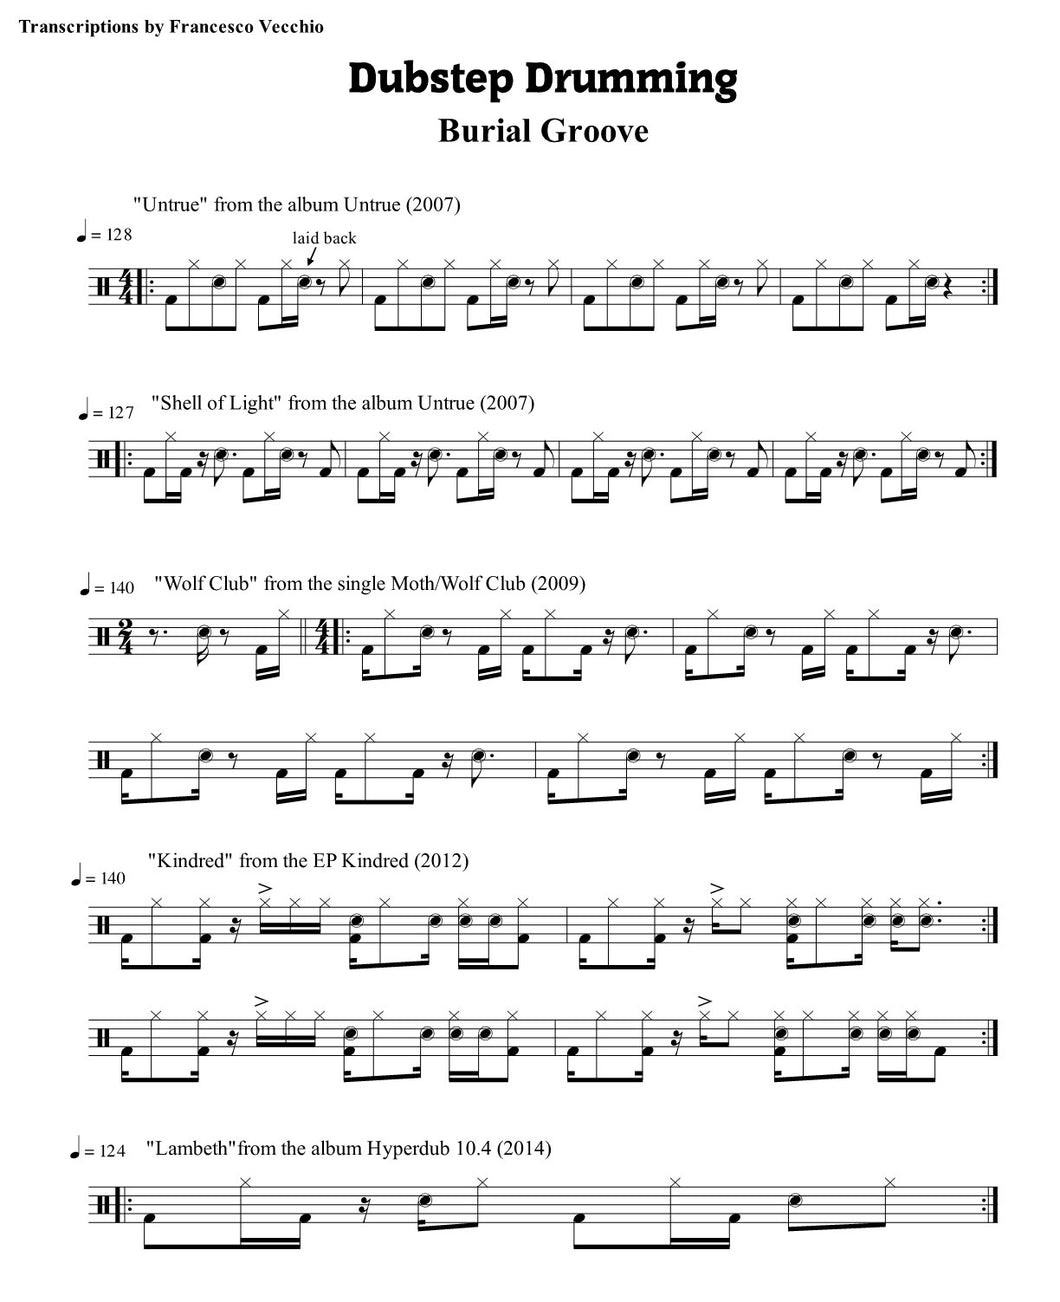 Kindred - Burial - Collection of Drum Transcriptions / Drum Sheet Music - FrancisDrummingBlog.com